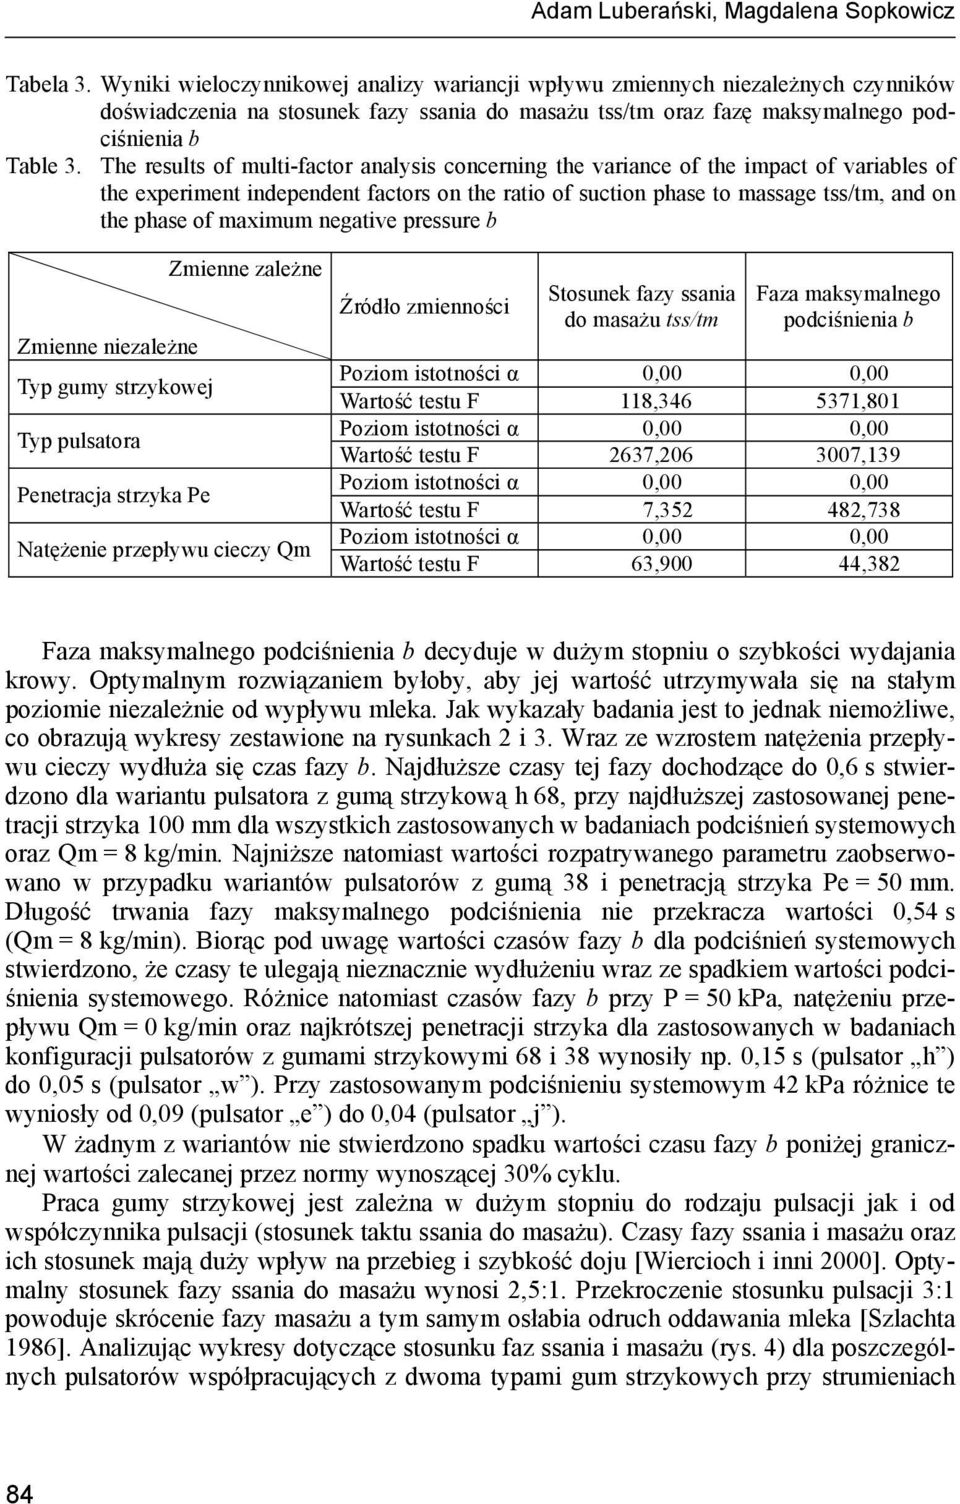 The results of multi-factor analysis concerning the variance of the impact of variables of the experiment independent factors on the ratio of suction phase to massage tss/tm, and on the phase of